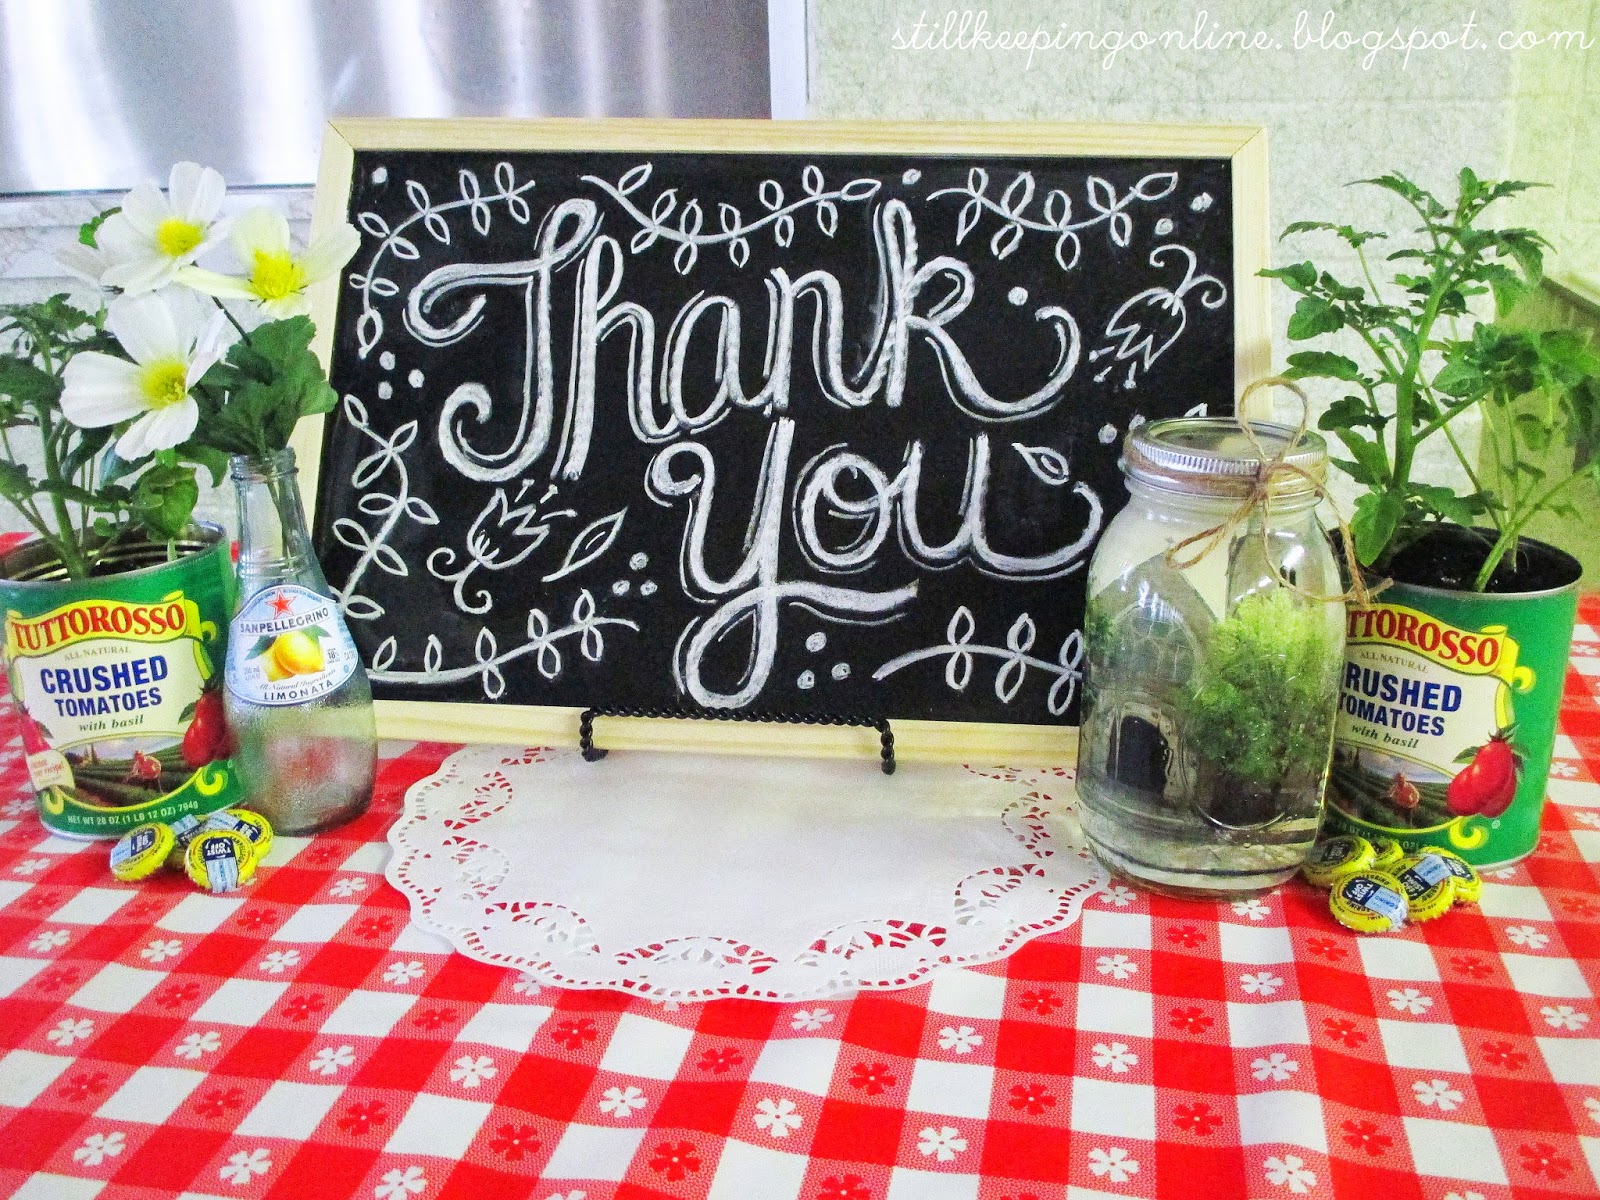 Still Keeping On The Narrow Way: Decorating For A "Thank You" Dinner